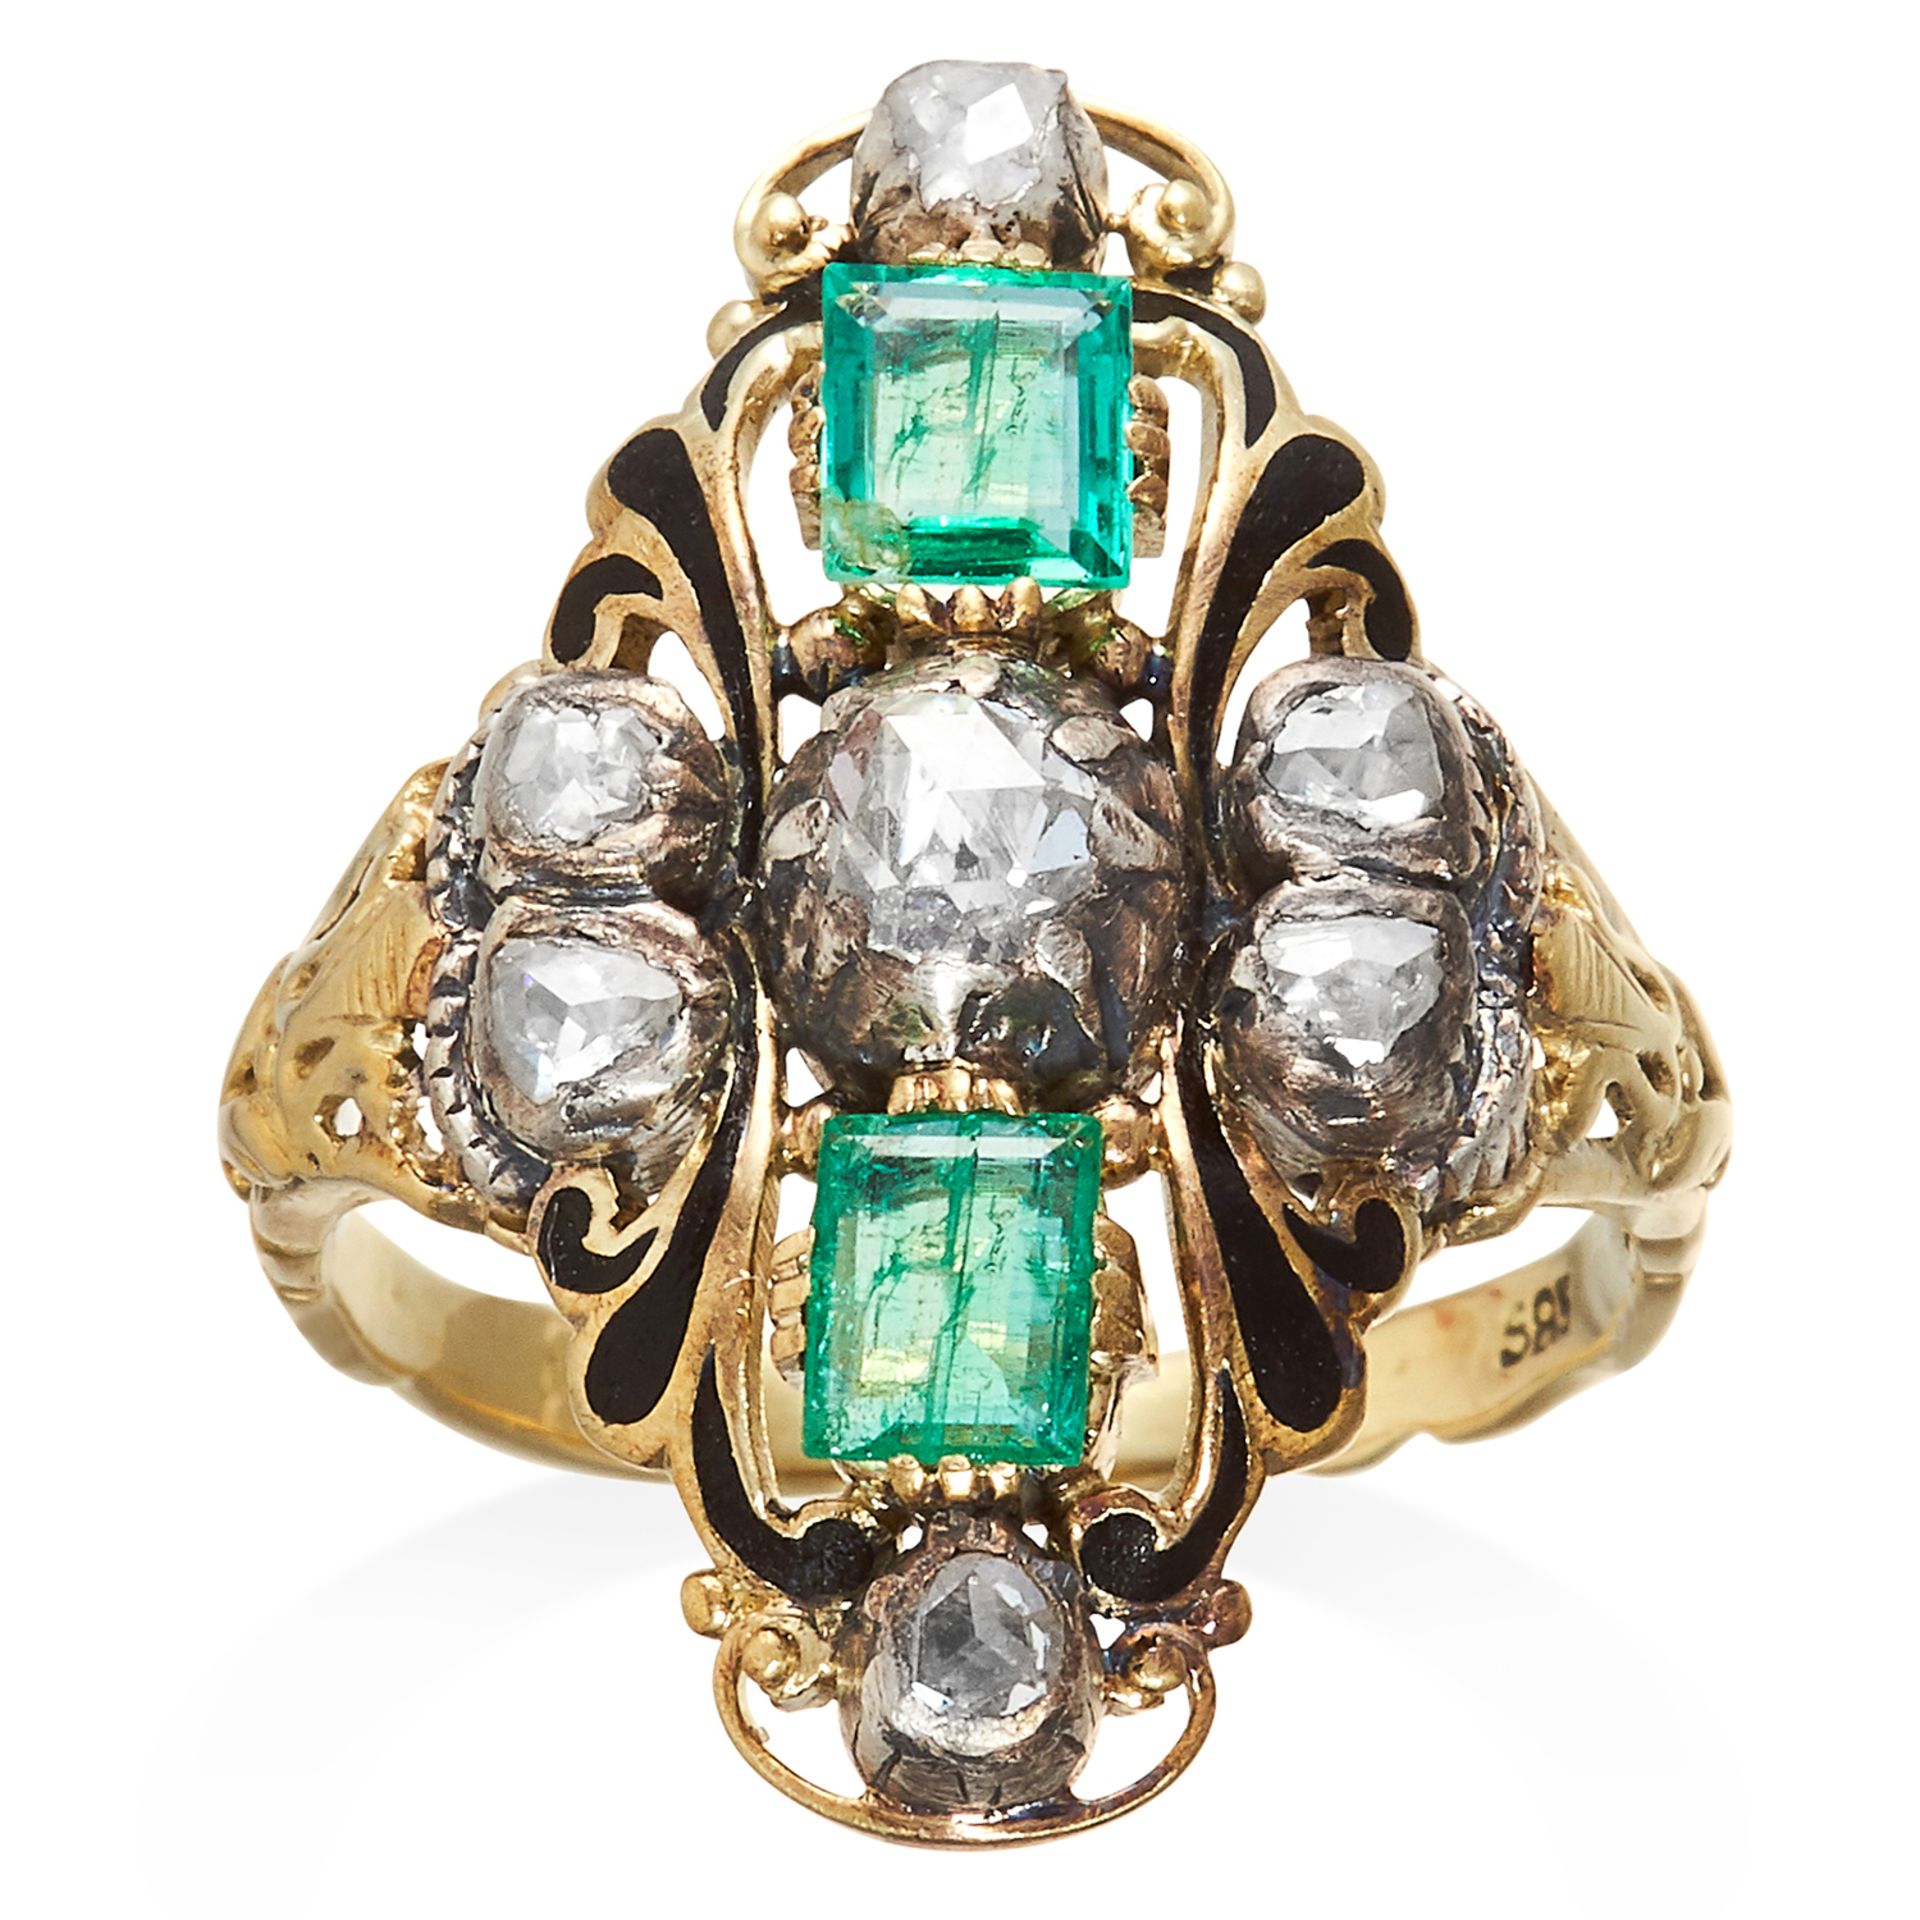 AN ANTIQUE EMERALD, DIAMOND AND ENAMEL RING in high carat yellow gold and silver, step cut